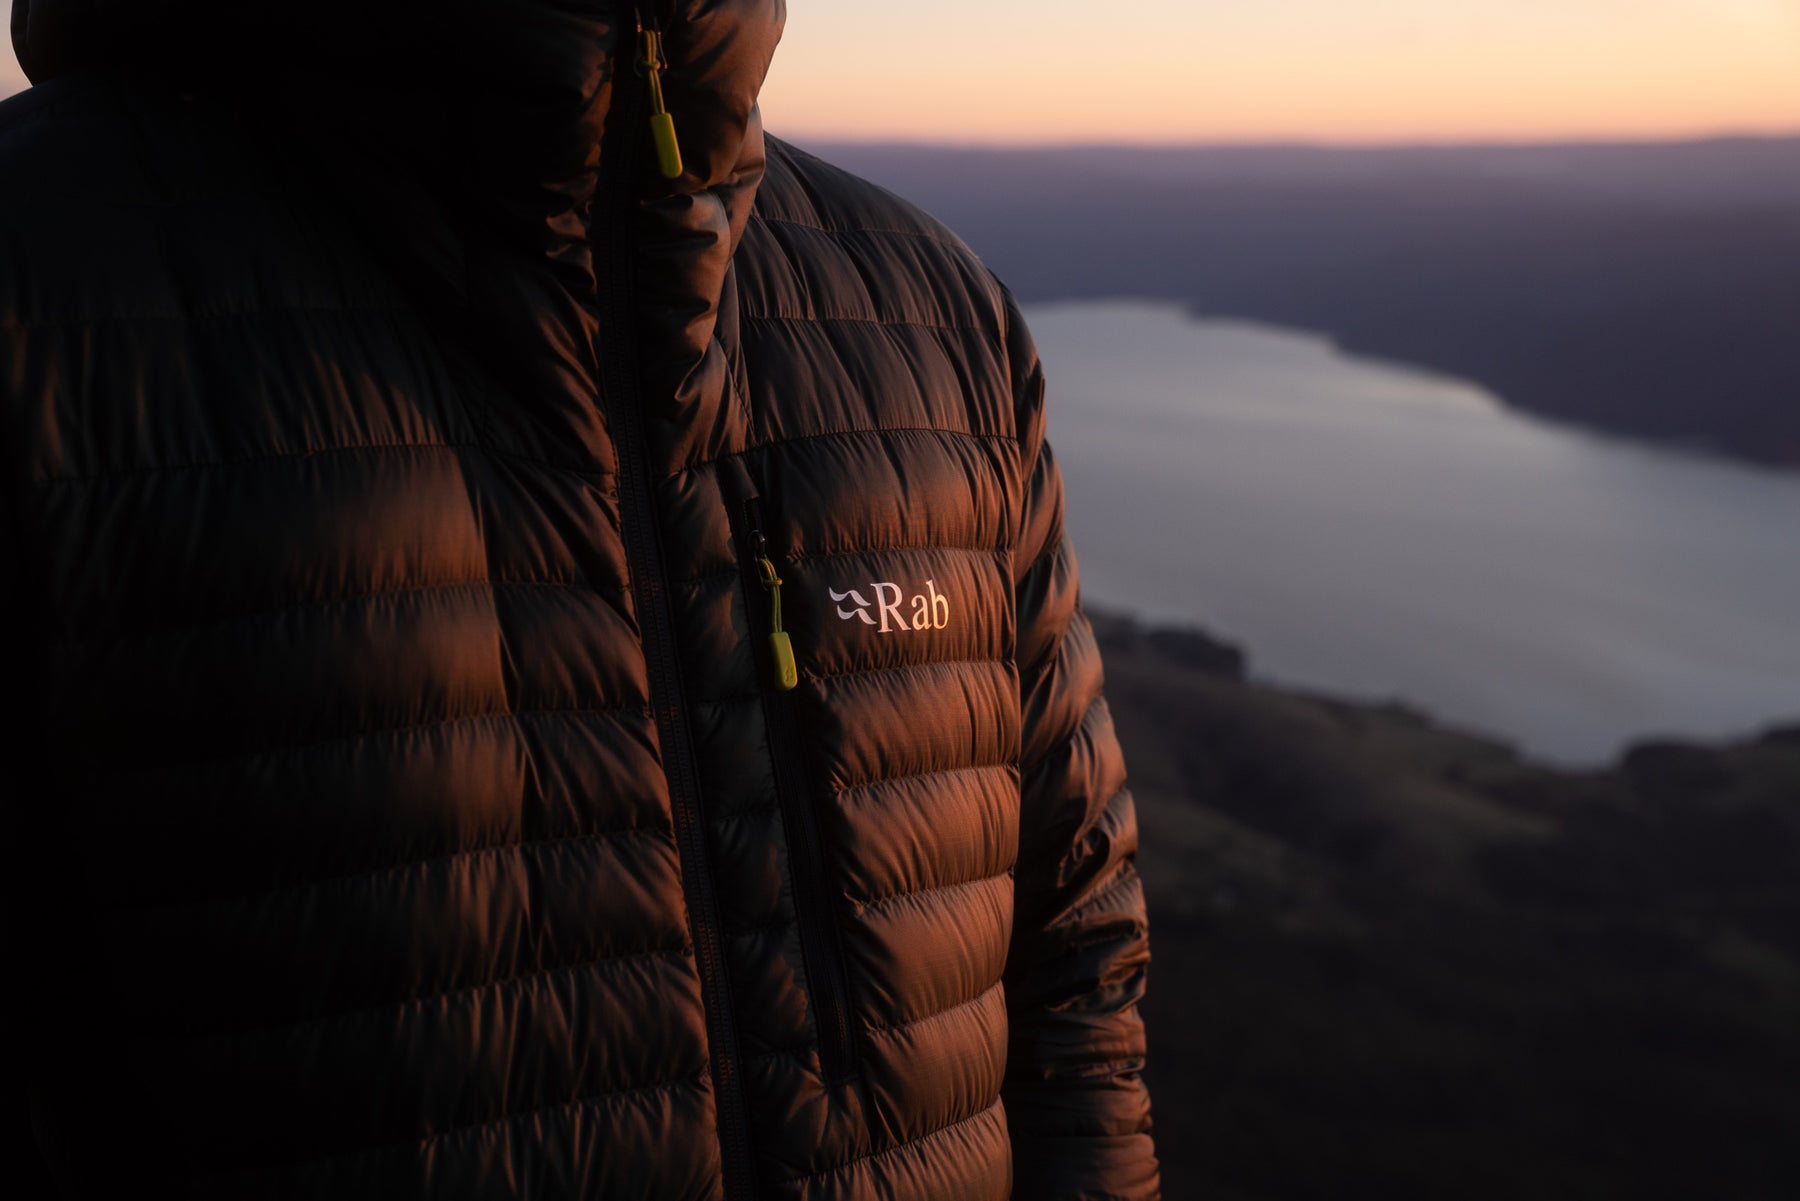 Waterproof, windproof and warm jackets from Rab. For hiking, climbing, the outdoors.